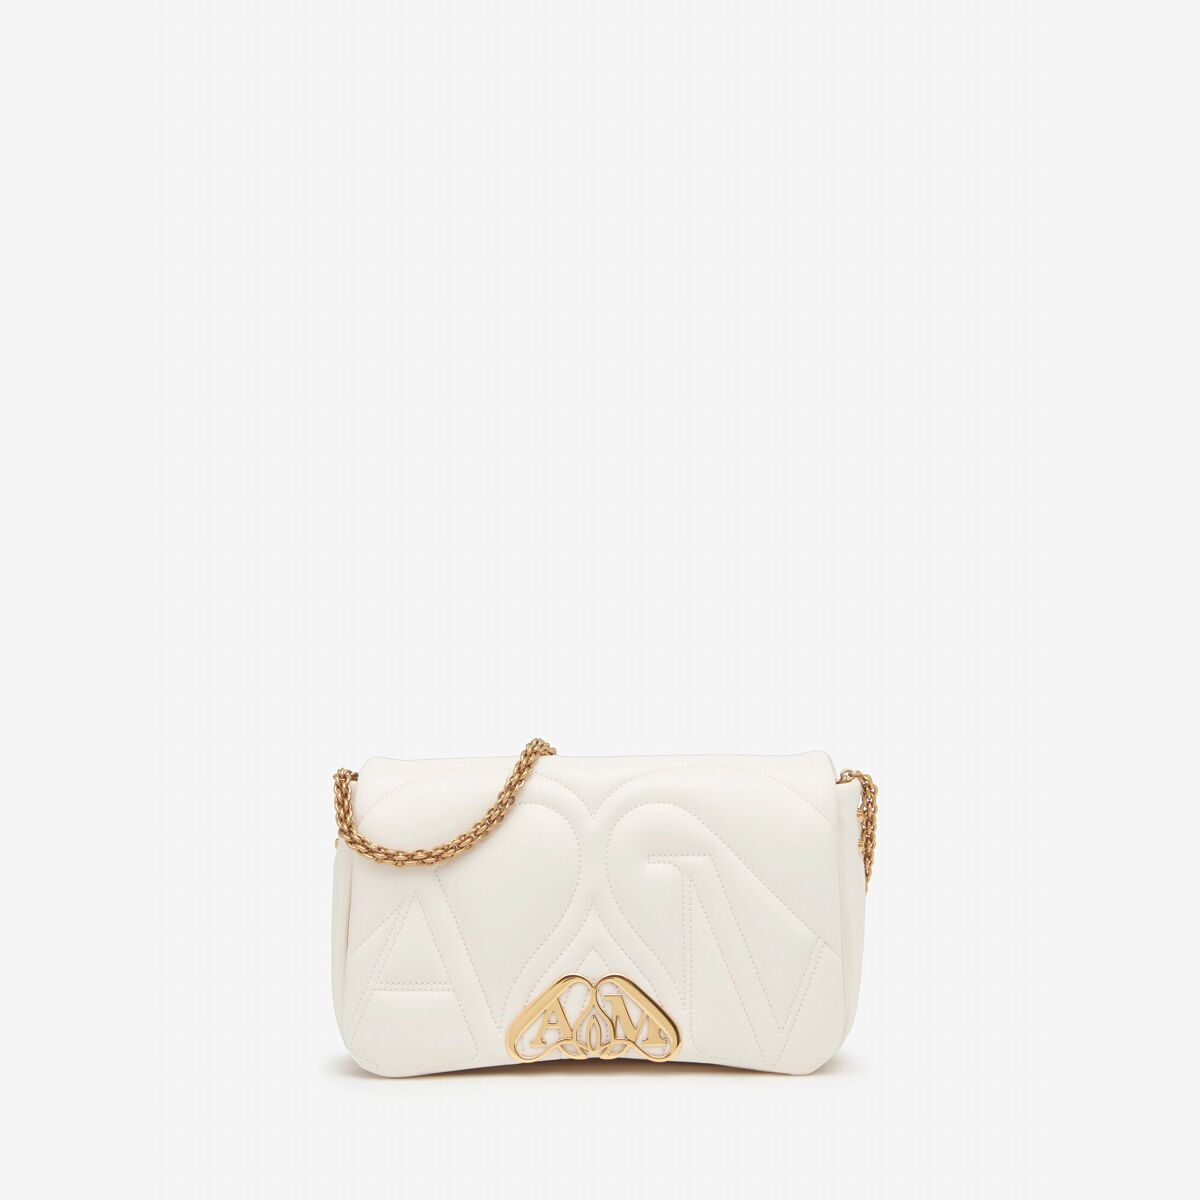 ALEXANDER MCQUEEN - The Seal Small Bag - Item 7573751BLE19210